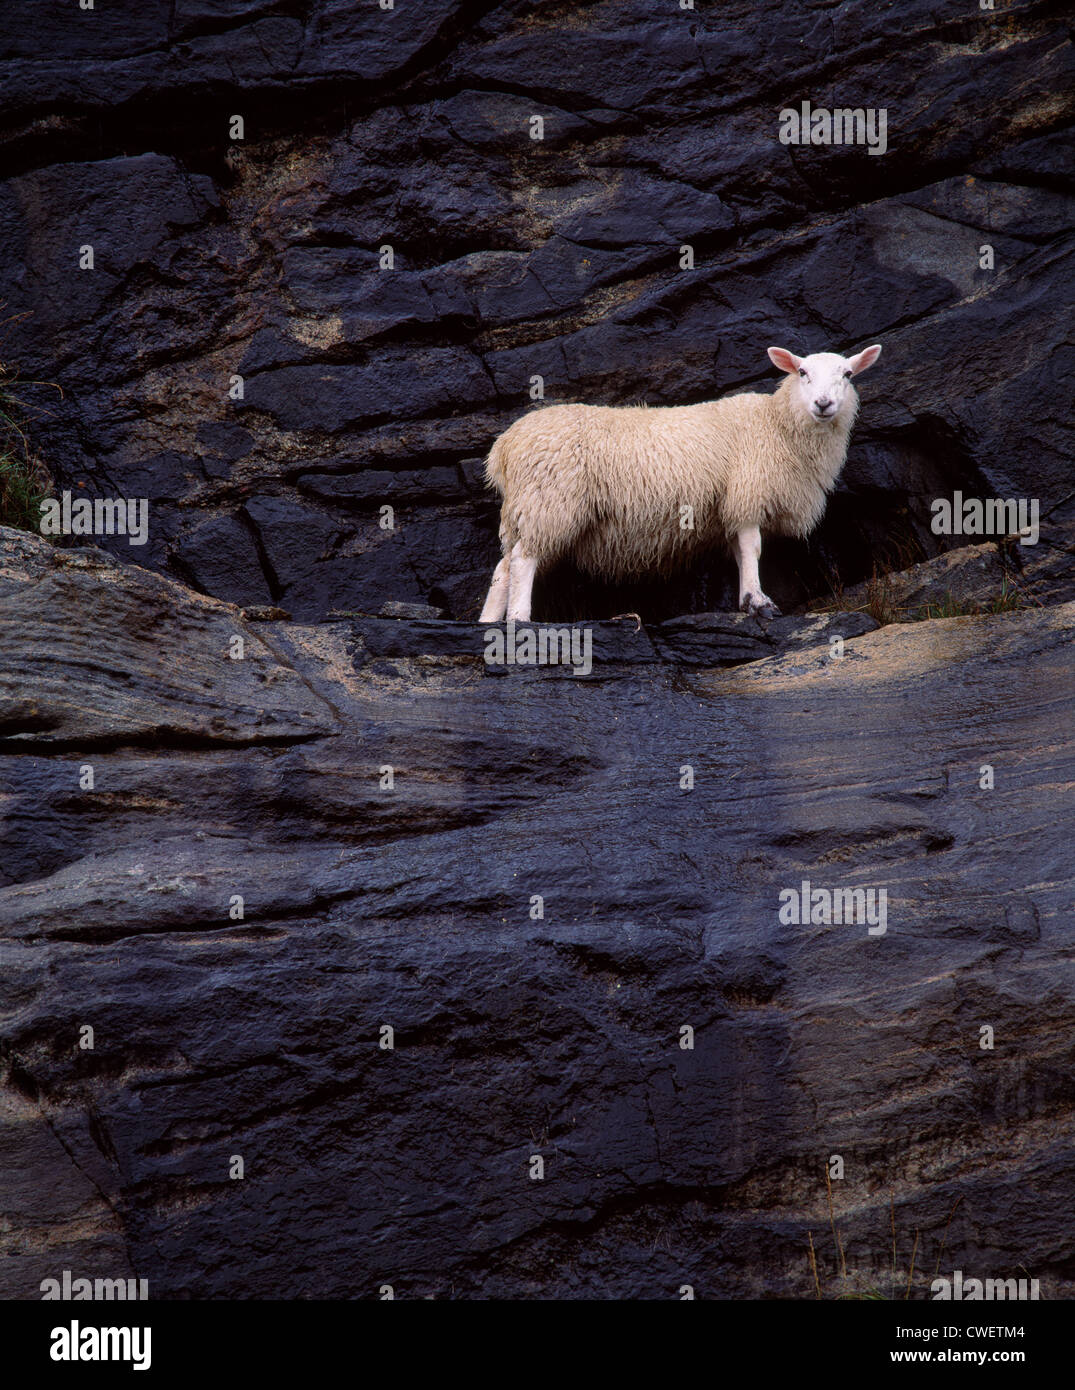 A sheep stuck on a narrow ledge on a cliff face. Stock Photo